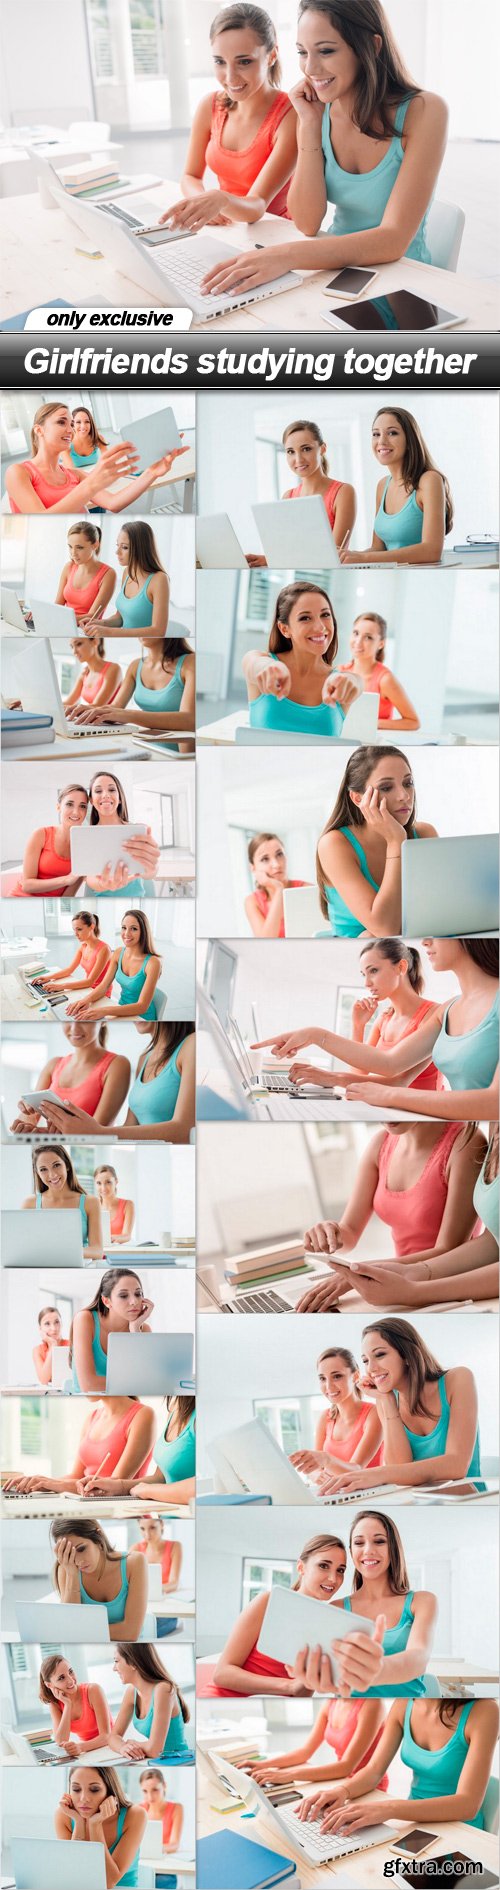 Girlfriends studying together - 21 UHQ JPEG